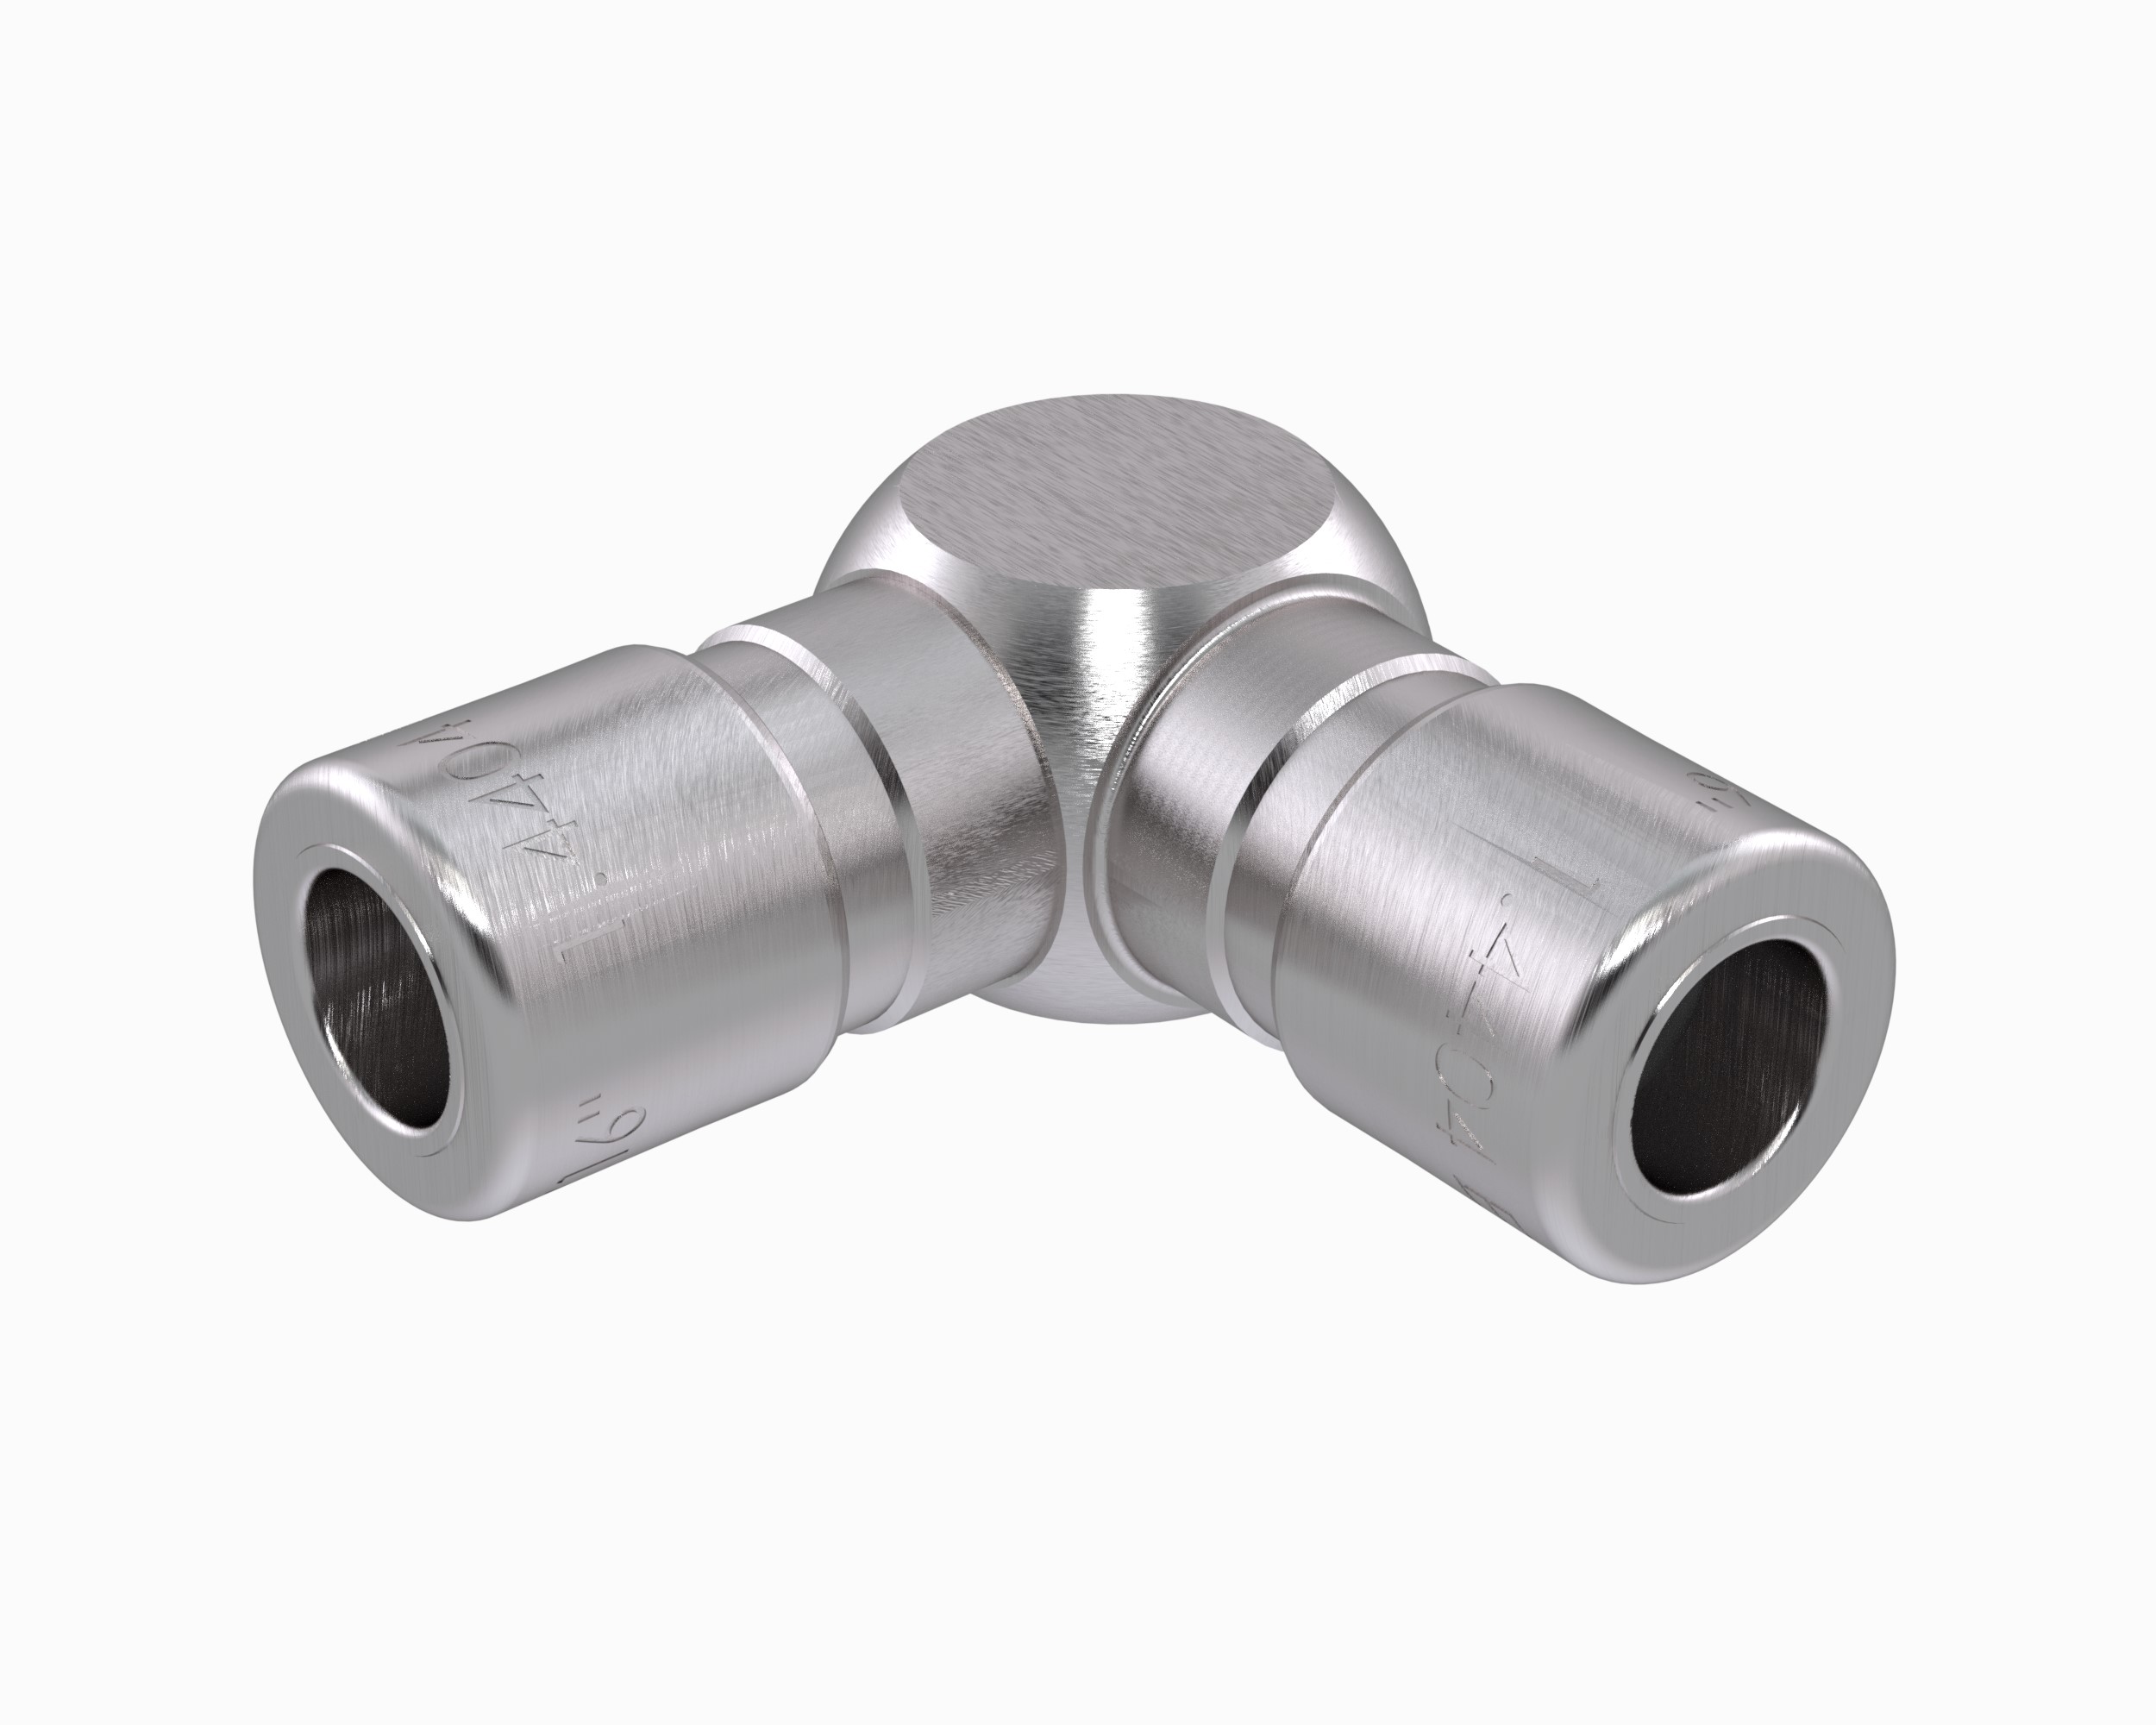 Double Seal Elbow Union Adapter Push To Connect Tube Fitting, Stainless STl, Inch X Metric - INOXLINE©